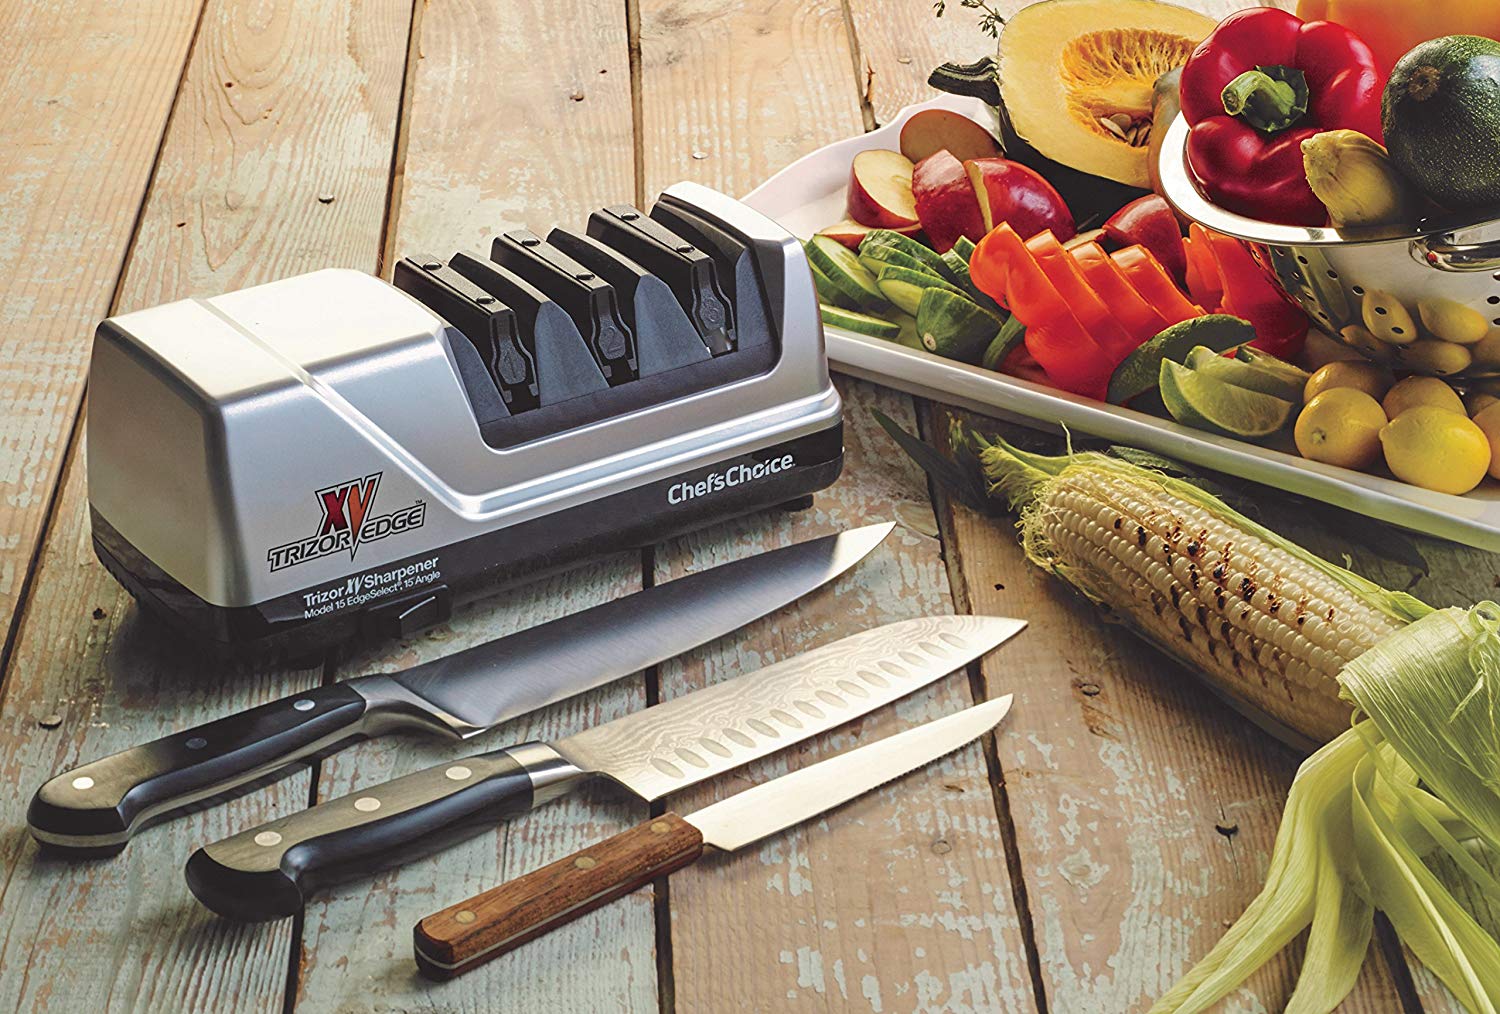 Top 10 Best Electric Knife Sharpener in 2020 Reviews | Guide